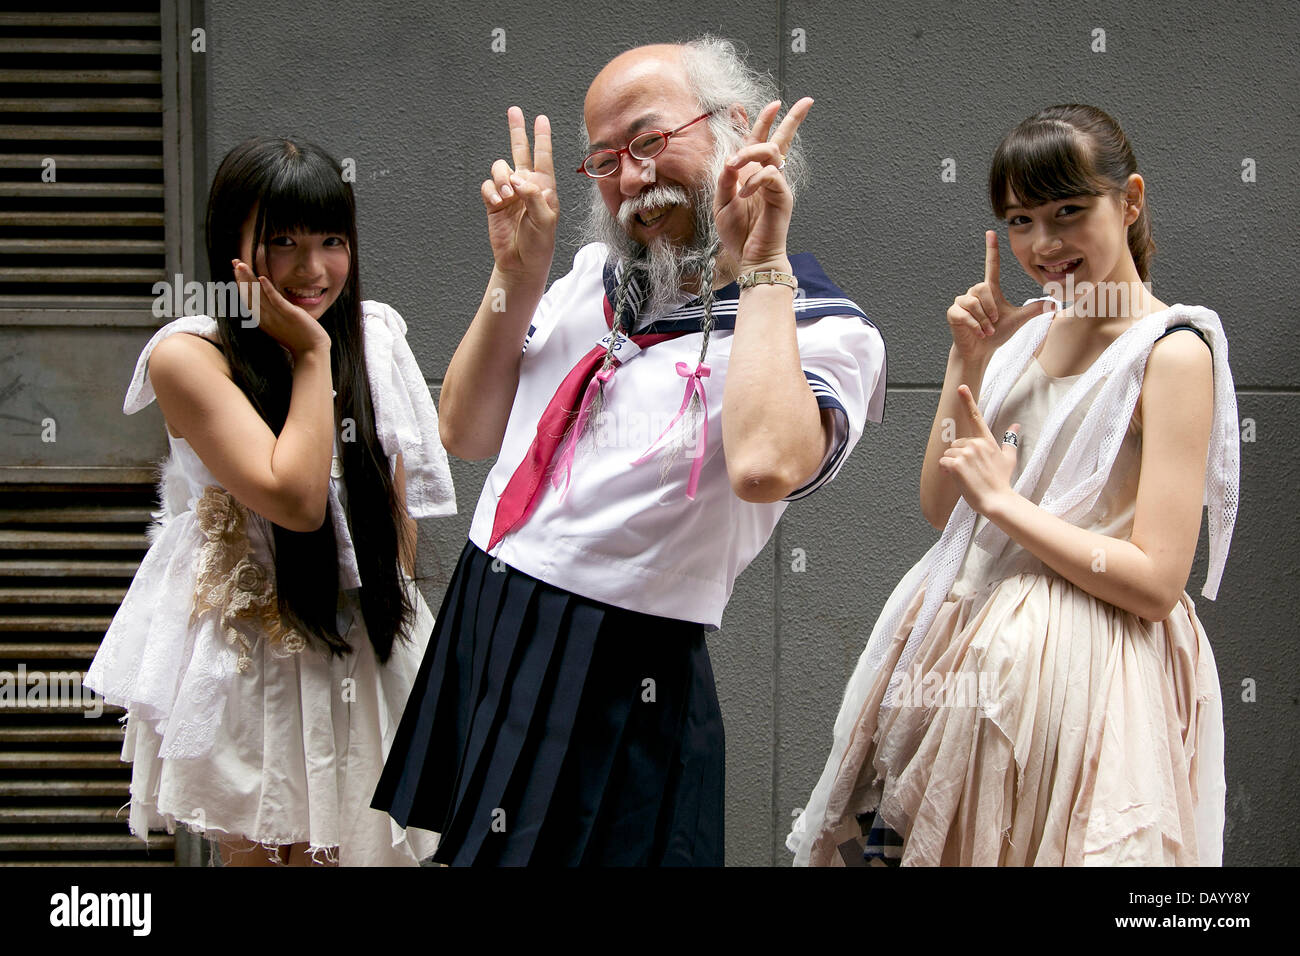 Tokyo, Japan. 20th July, 2013. The Japanese idol group 'Chaos de Japon' performance at Pasela Resorts Grande Shibuya on July 20, 2013. The middle-aged man 'Grow-Hair' (Hideaki Kobayashi), who is producer and member of the junior-high schoolgirls idol group 'Chaos de Japon', wears a schoolgirl uniform (Sailor Suit) every weekend around Tokyo. He holds a Master in Mathematics from Waseda University and works in a printing company on weekdays. He started wearing the schoolgirl uniform in June 2011, because of a Ramen shop promotion for which people in a Sailor-suit could get free noodles. Stock Photo